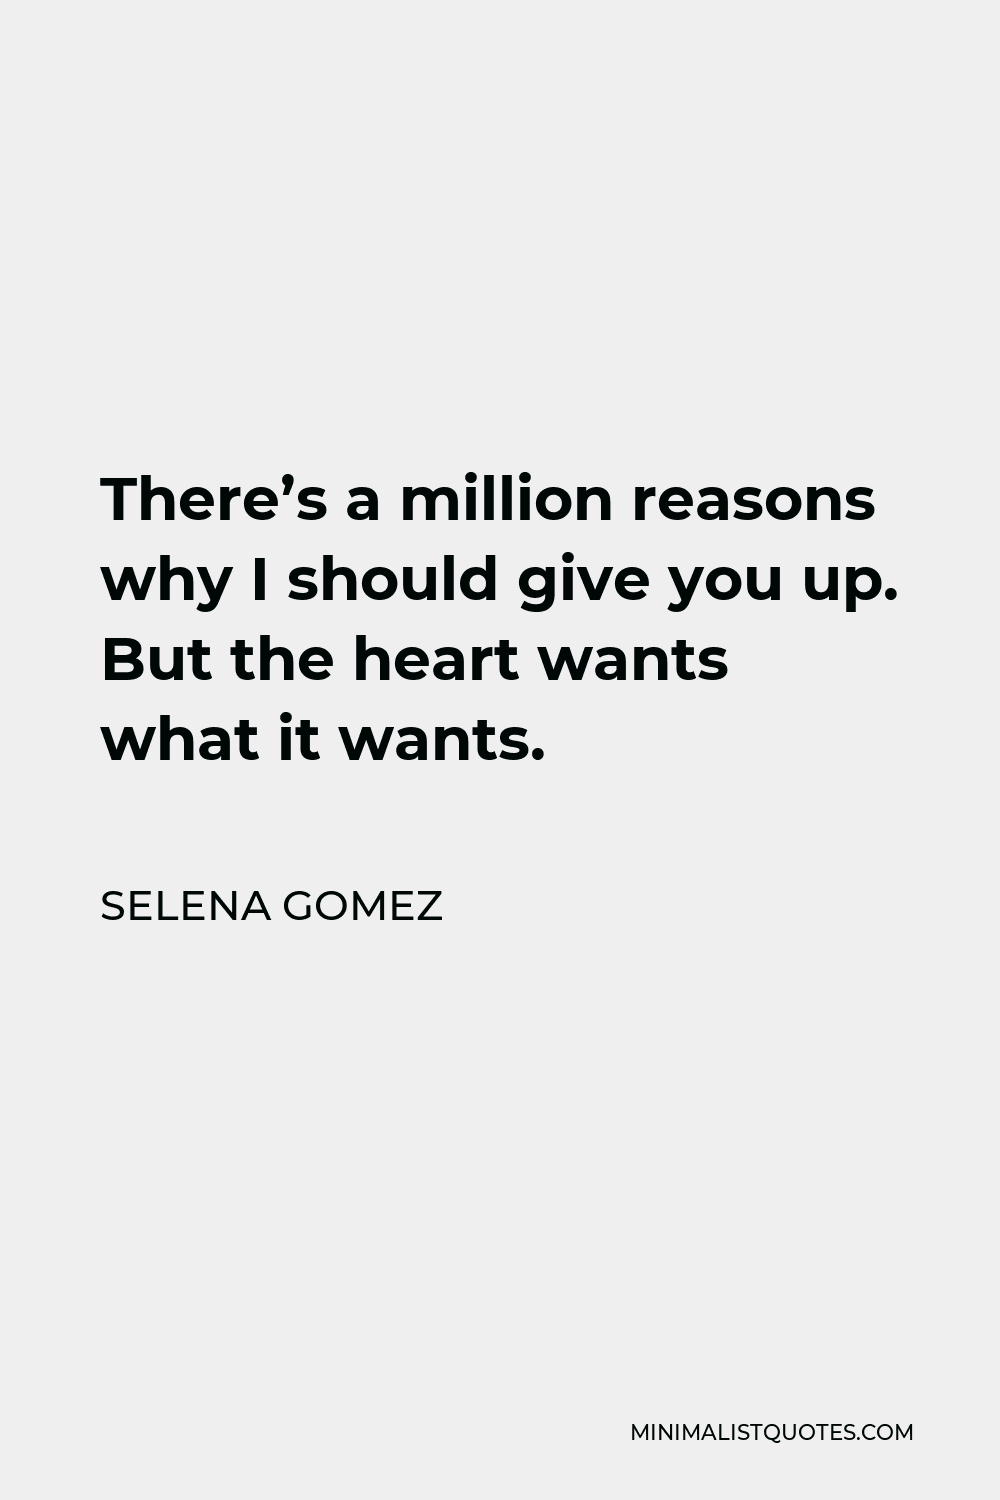 Selena Gomez Quote - There’s a million reasons why I should give you up. But the heart wants what it wants.